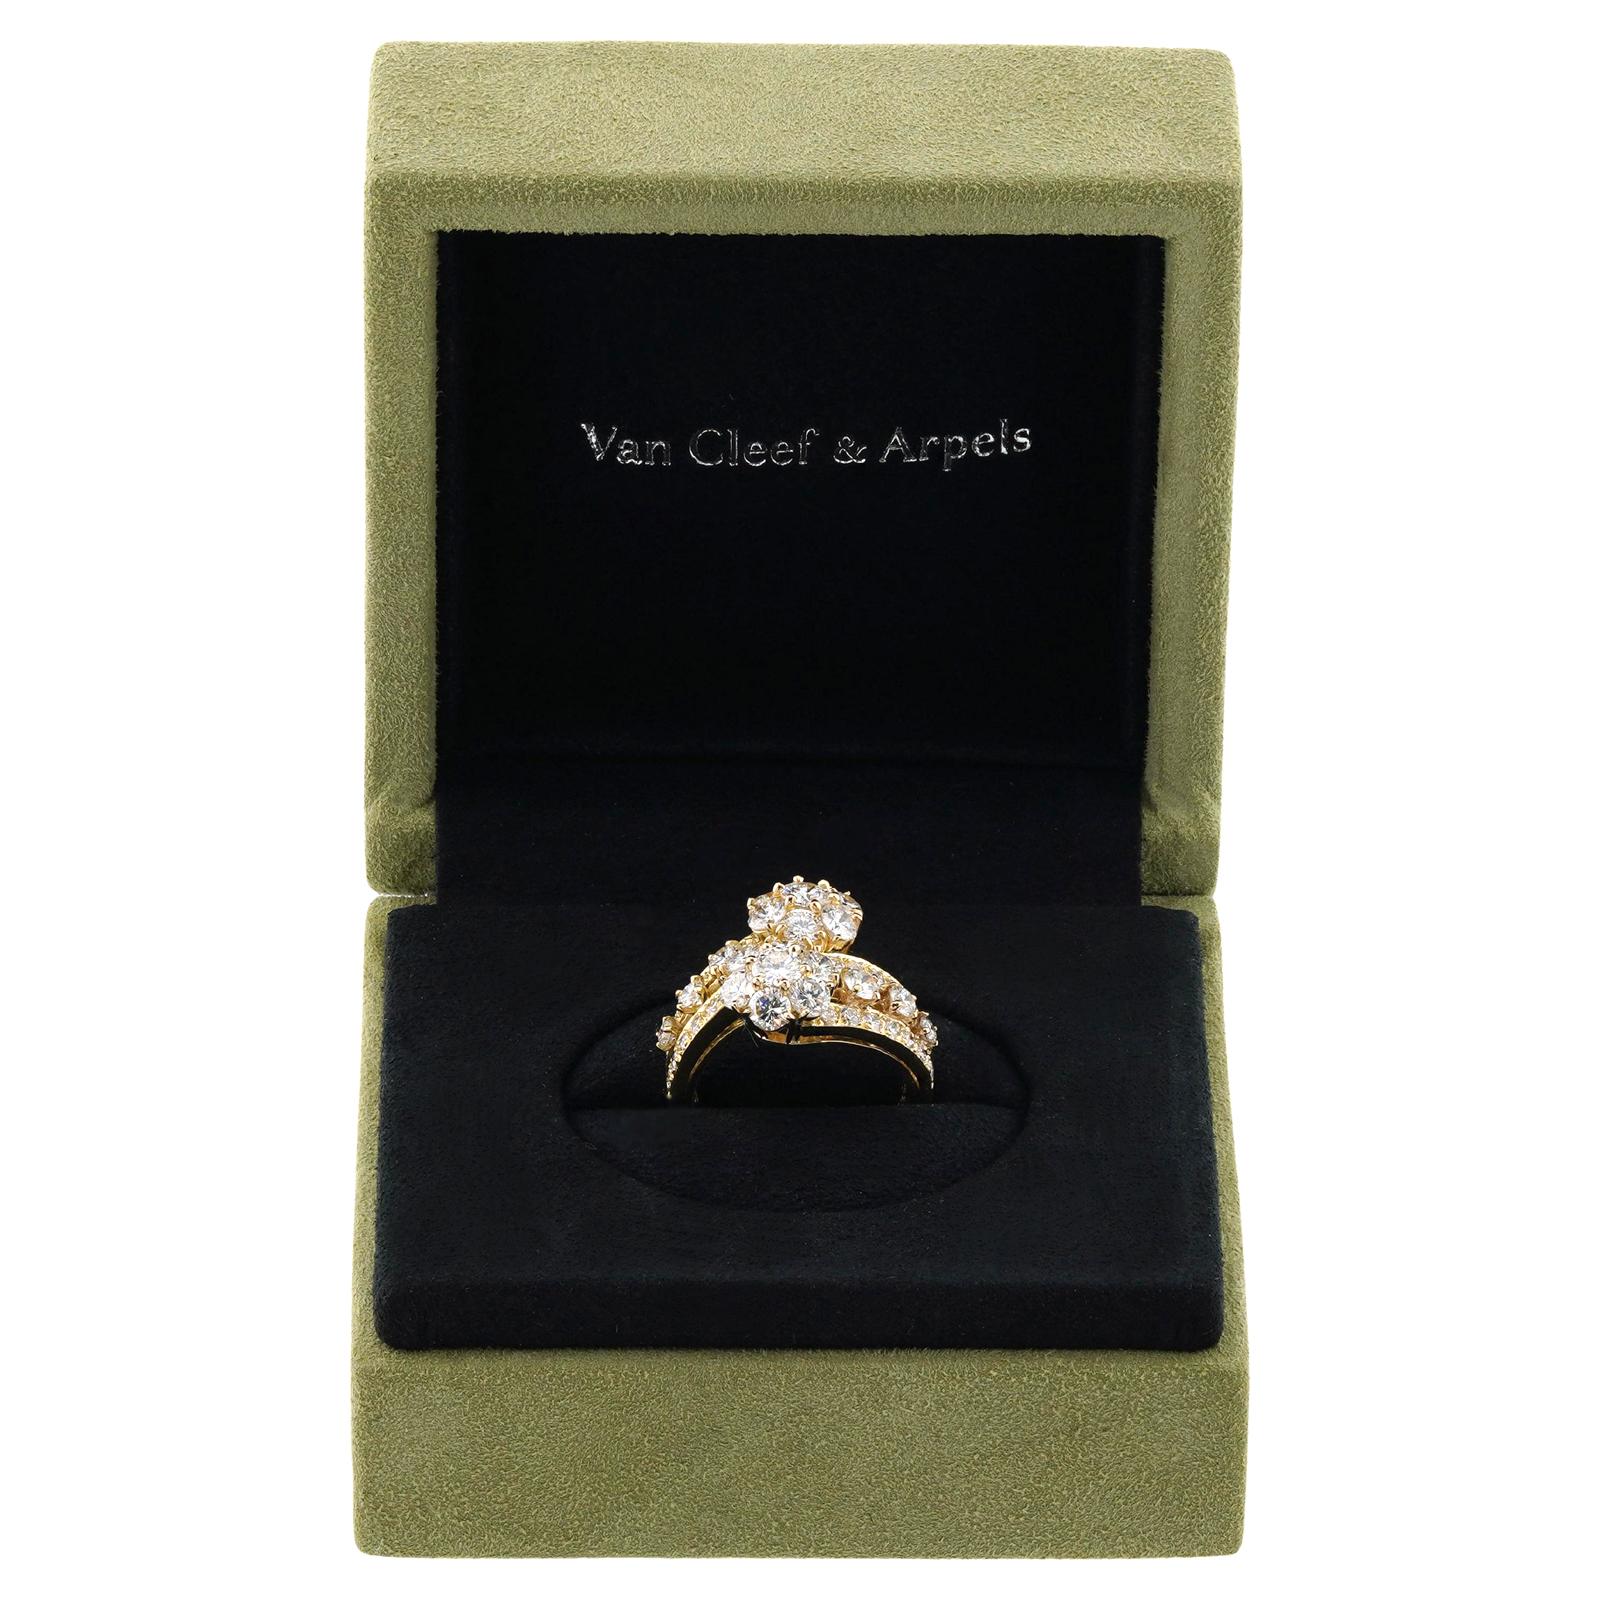 VAN CLEEF & ARPELS Snowflake 18k Yellow Gold Diamond Ring Size 5 In Excellent Condition For Sale In New York, NY